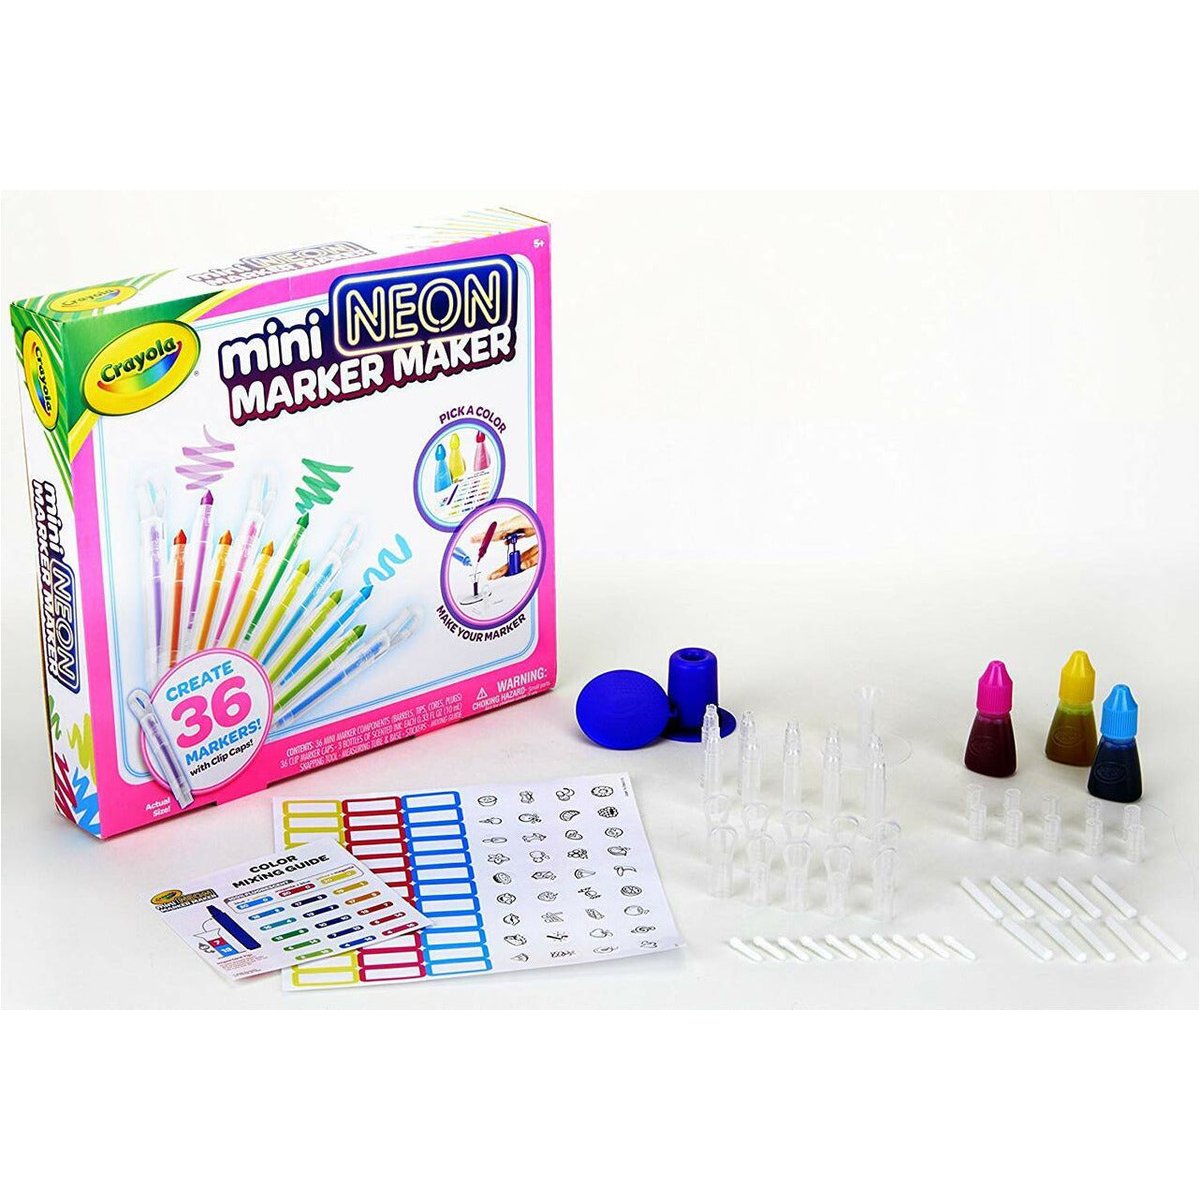 https://images.verishop.com/crayola-crayola-mini-neon-marker-maker-36-markers-with-clips-caps/M00071662072483-4203660695?auto=format&cs=strip&fit=max&w=1200